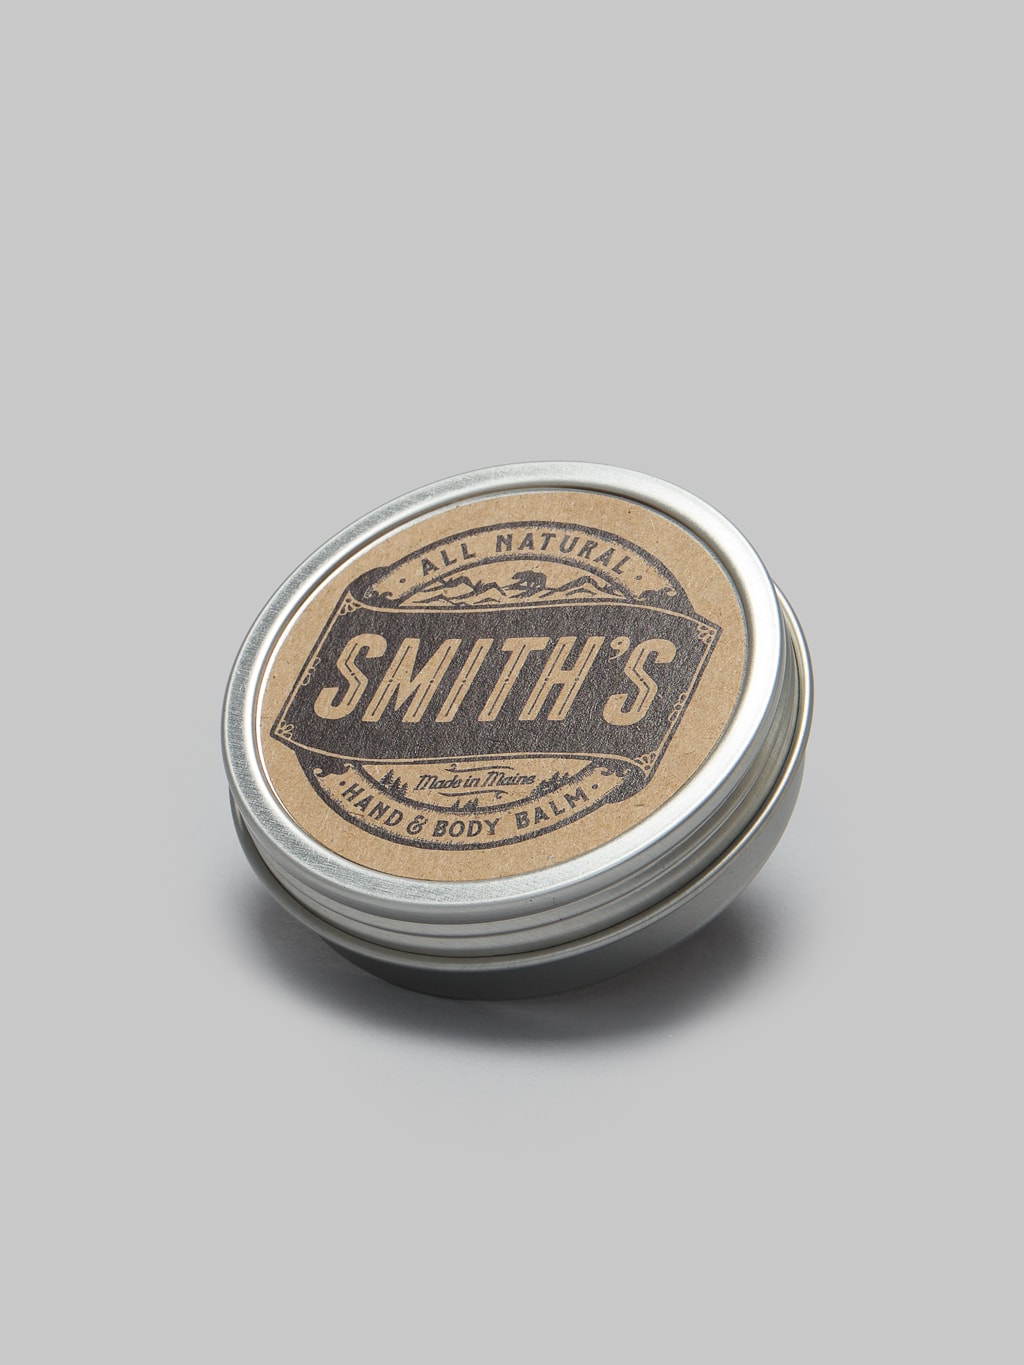 Smith s Hand and Body balm easy  to apply